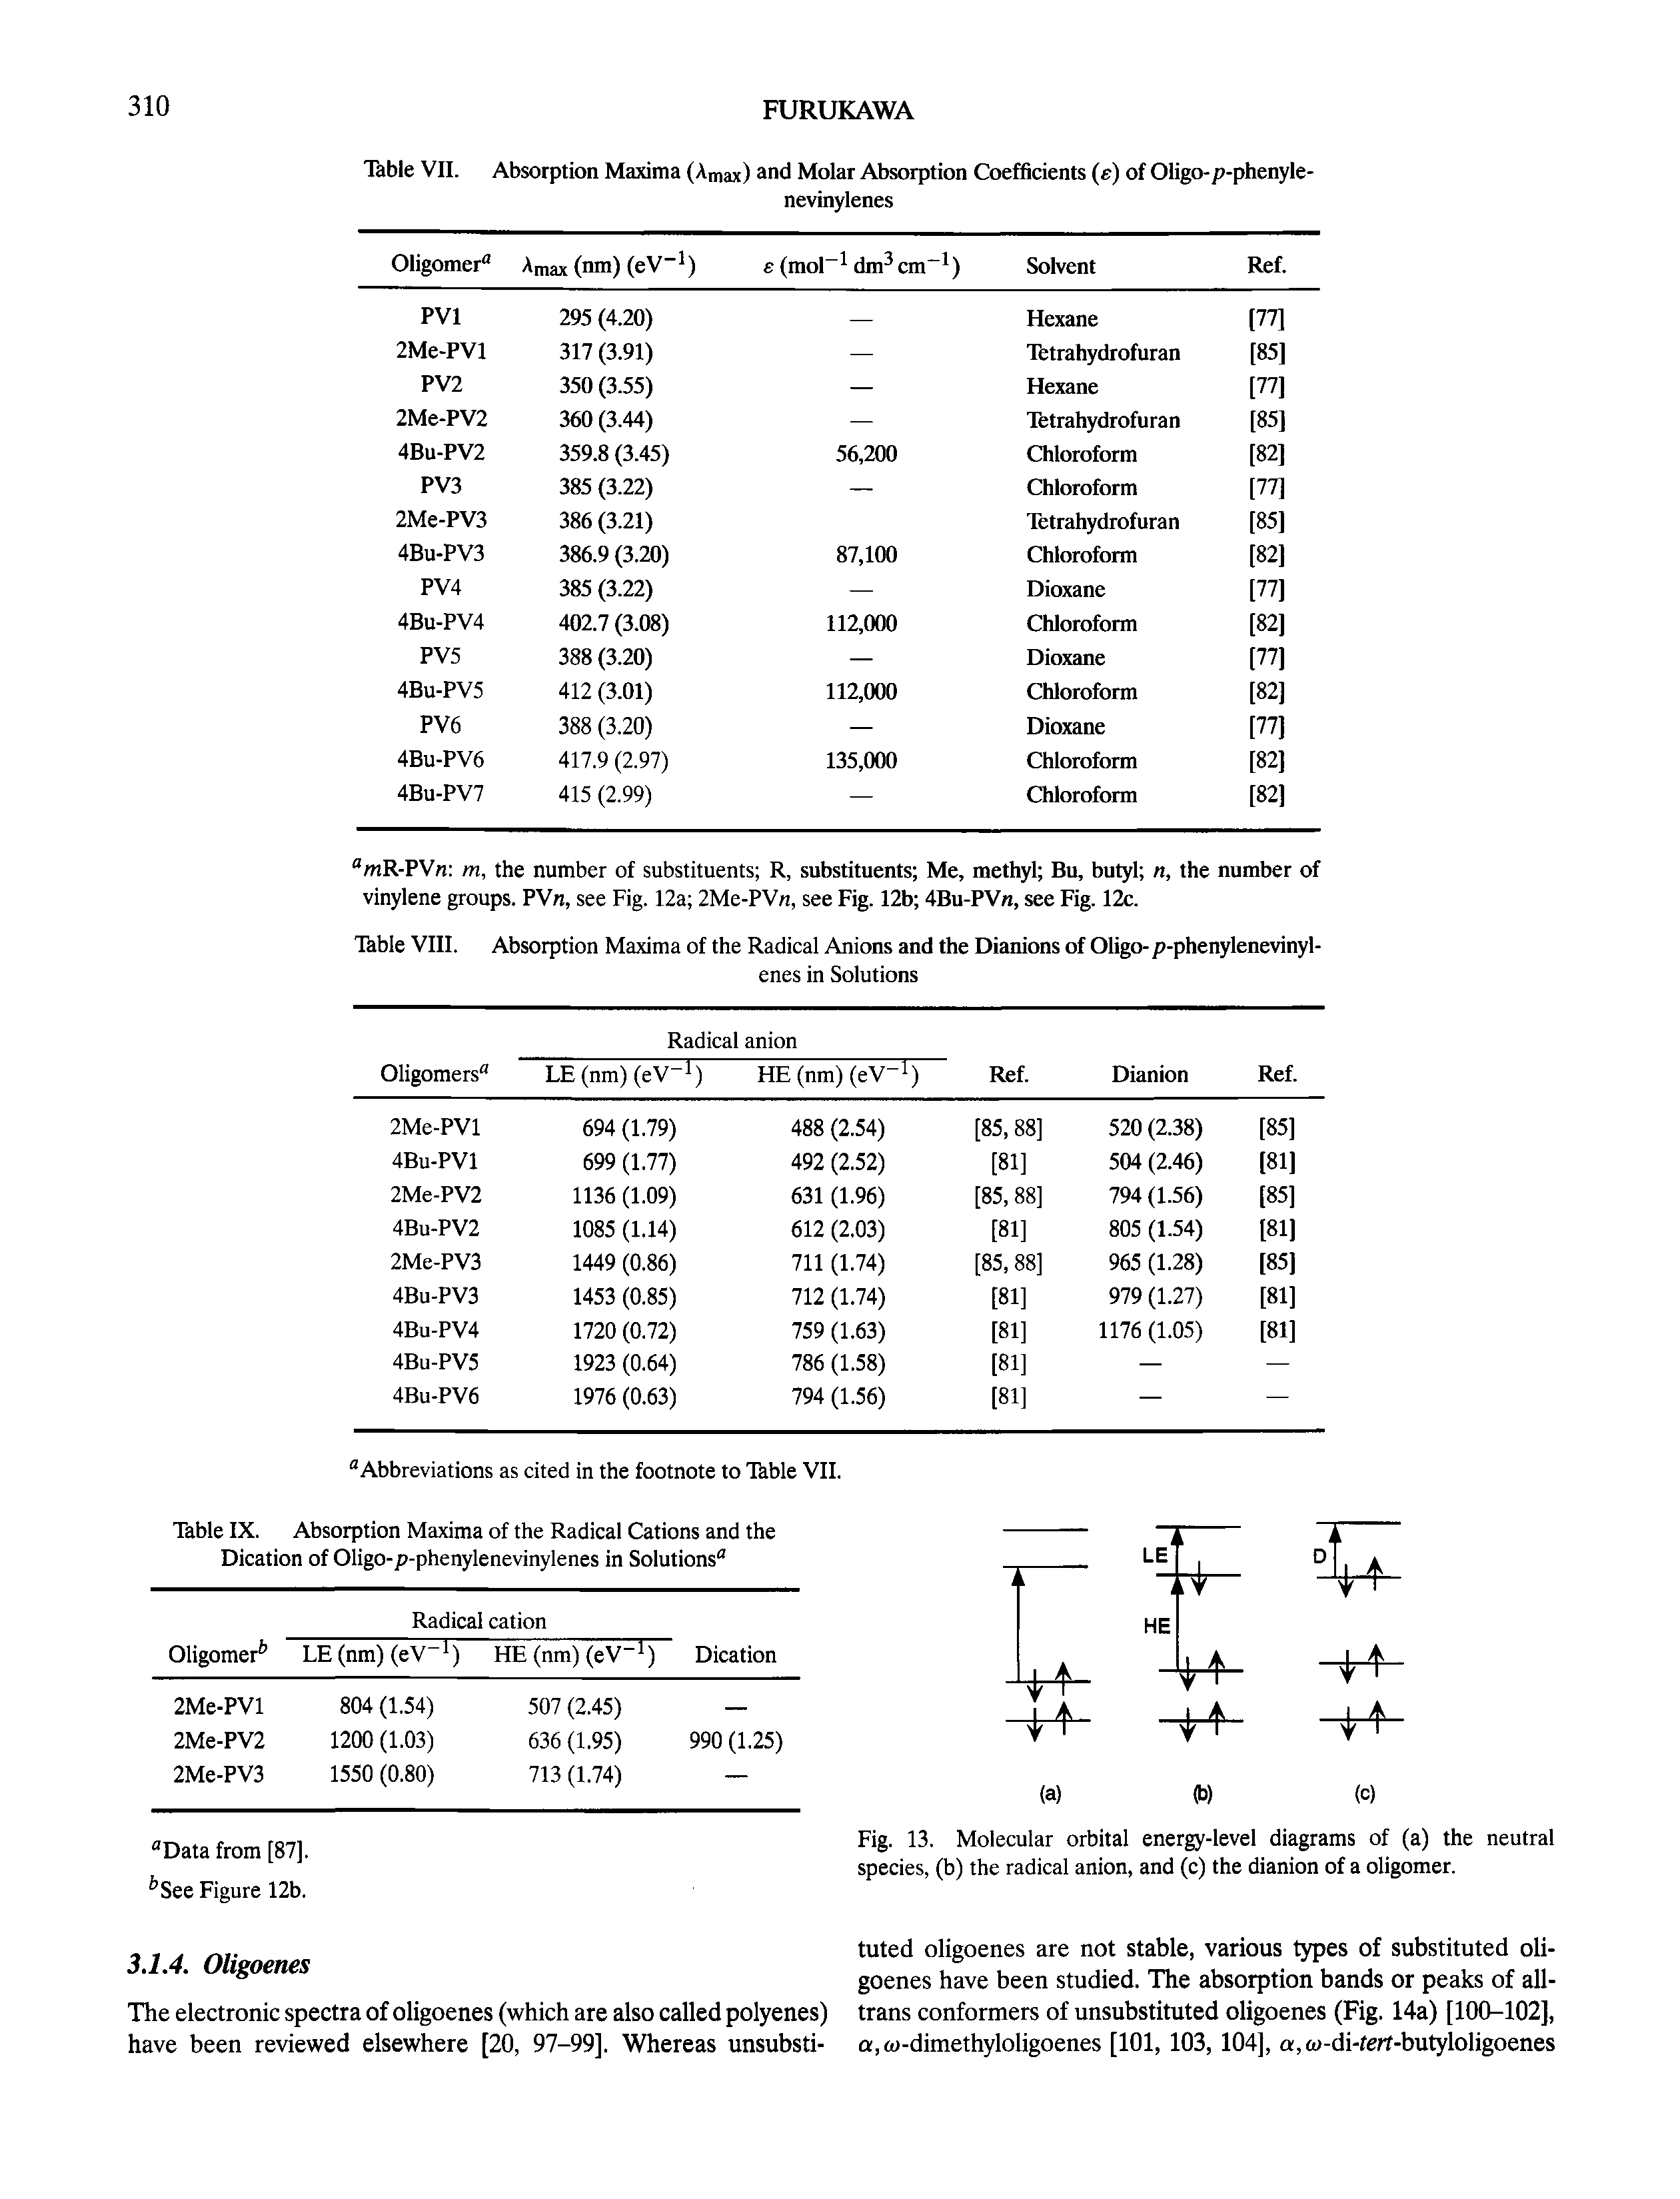 Table IX. Absorption Maxima of the Radical Cations and the Dication of Oligo-p-phenylenevinylenes in Solutions ...